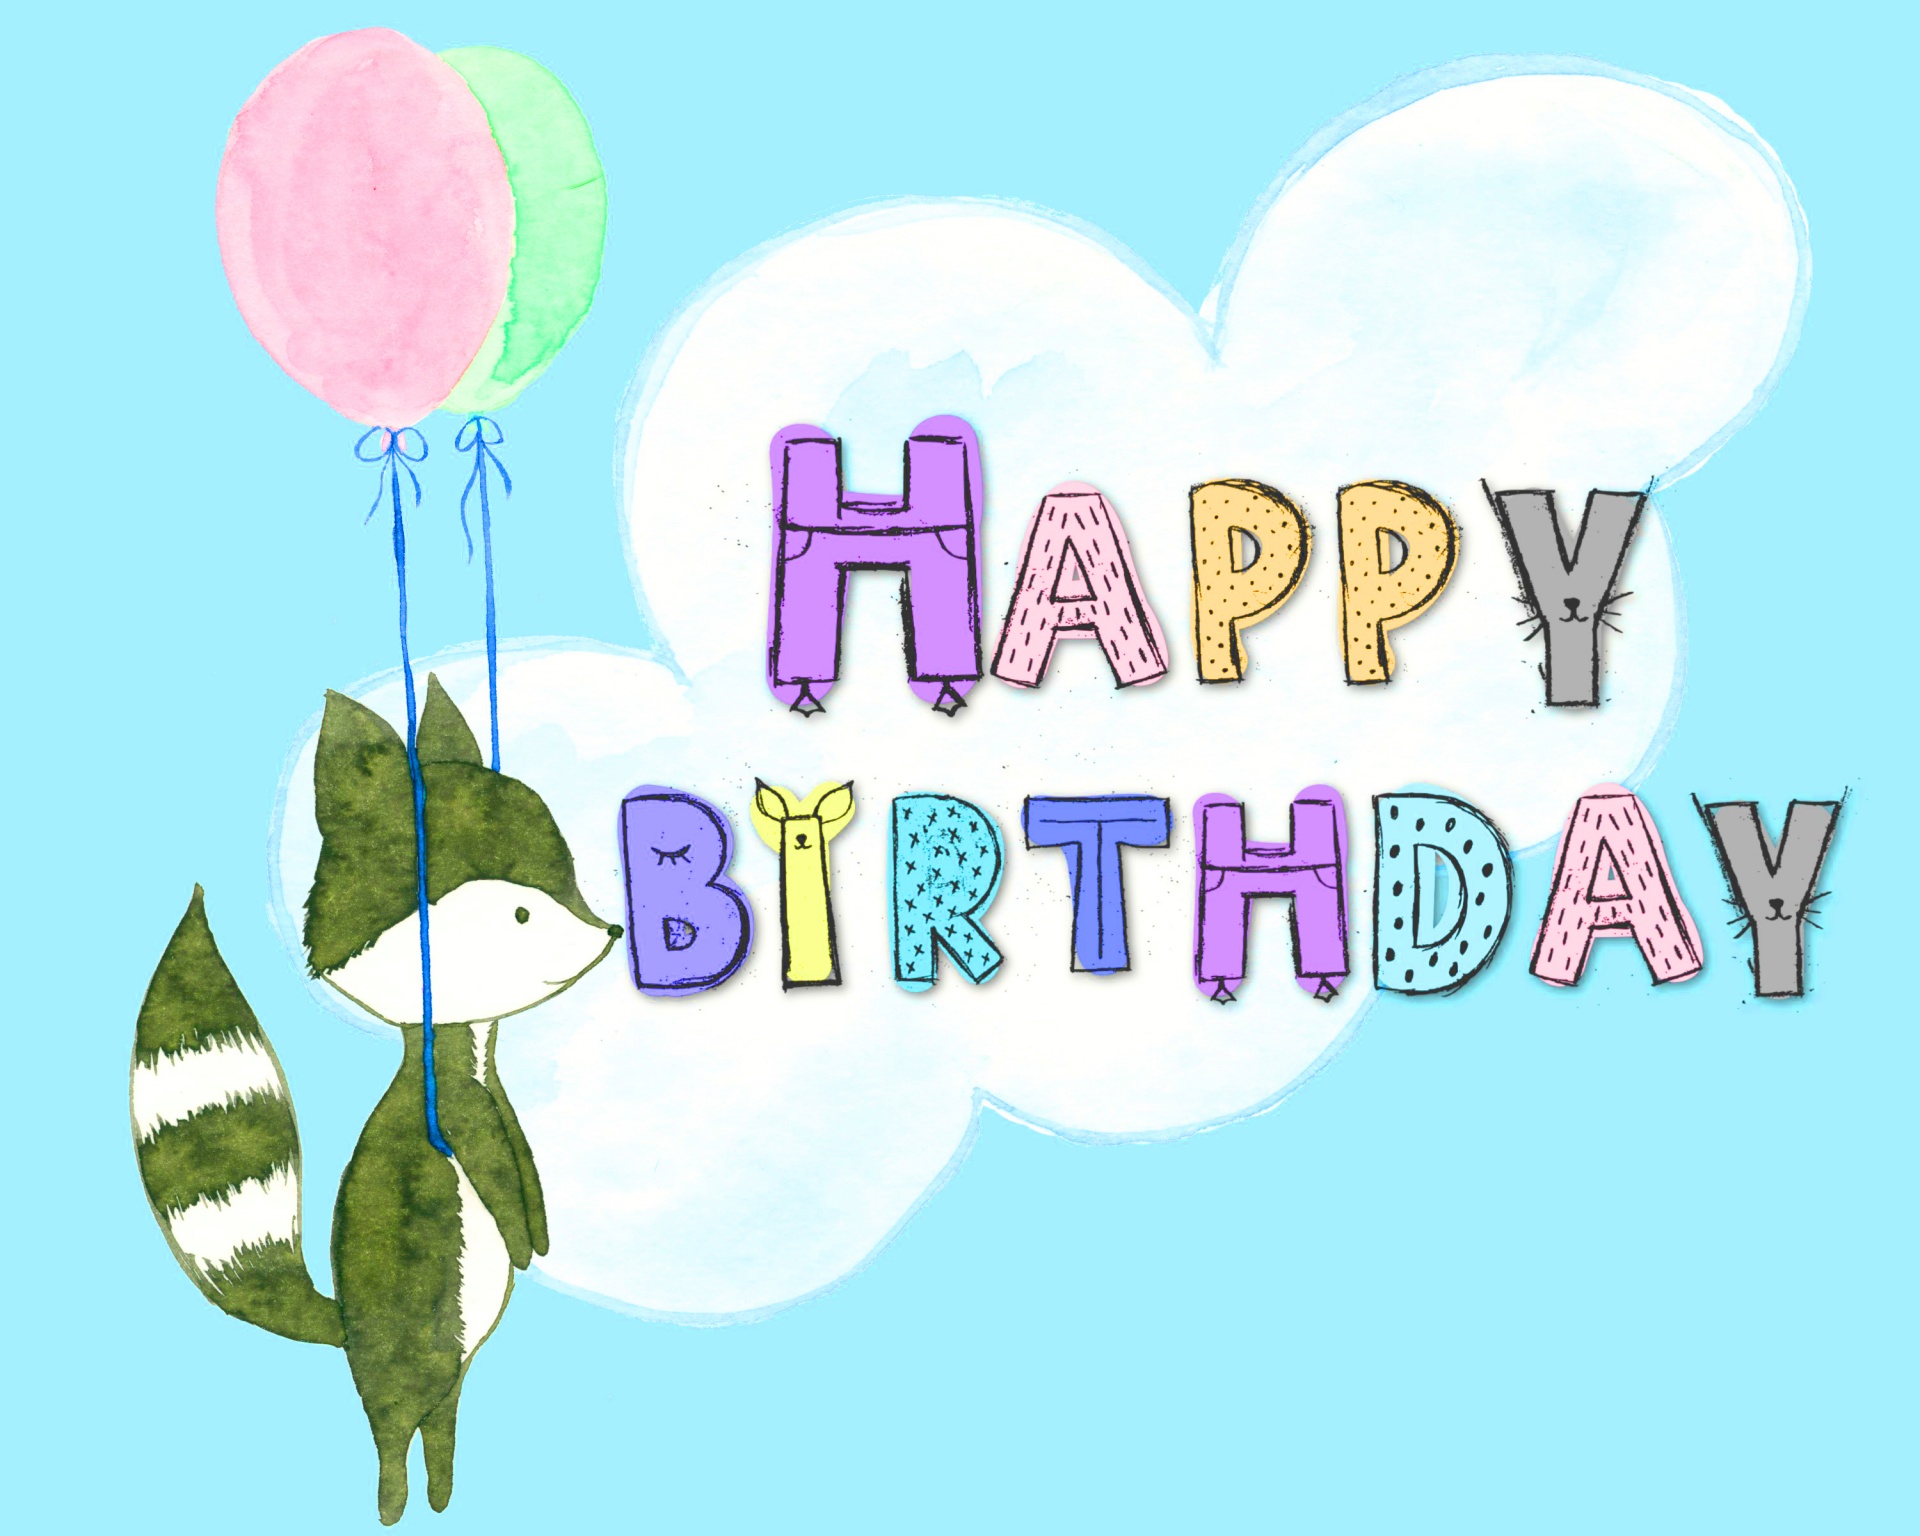 cute raccoon floating away with balloons with cartoon word art spelling HAPPY BIRTHDAY